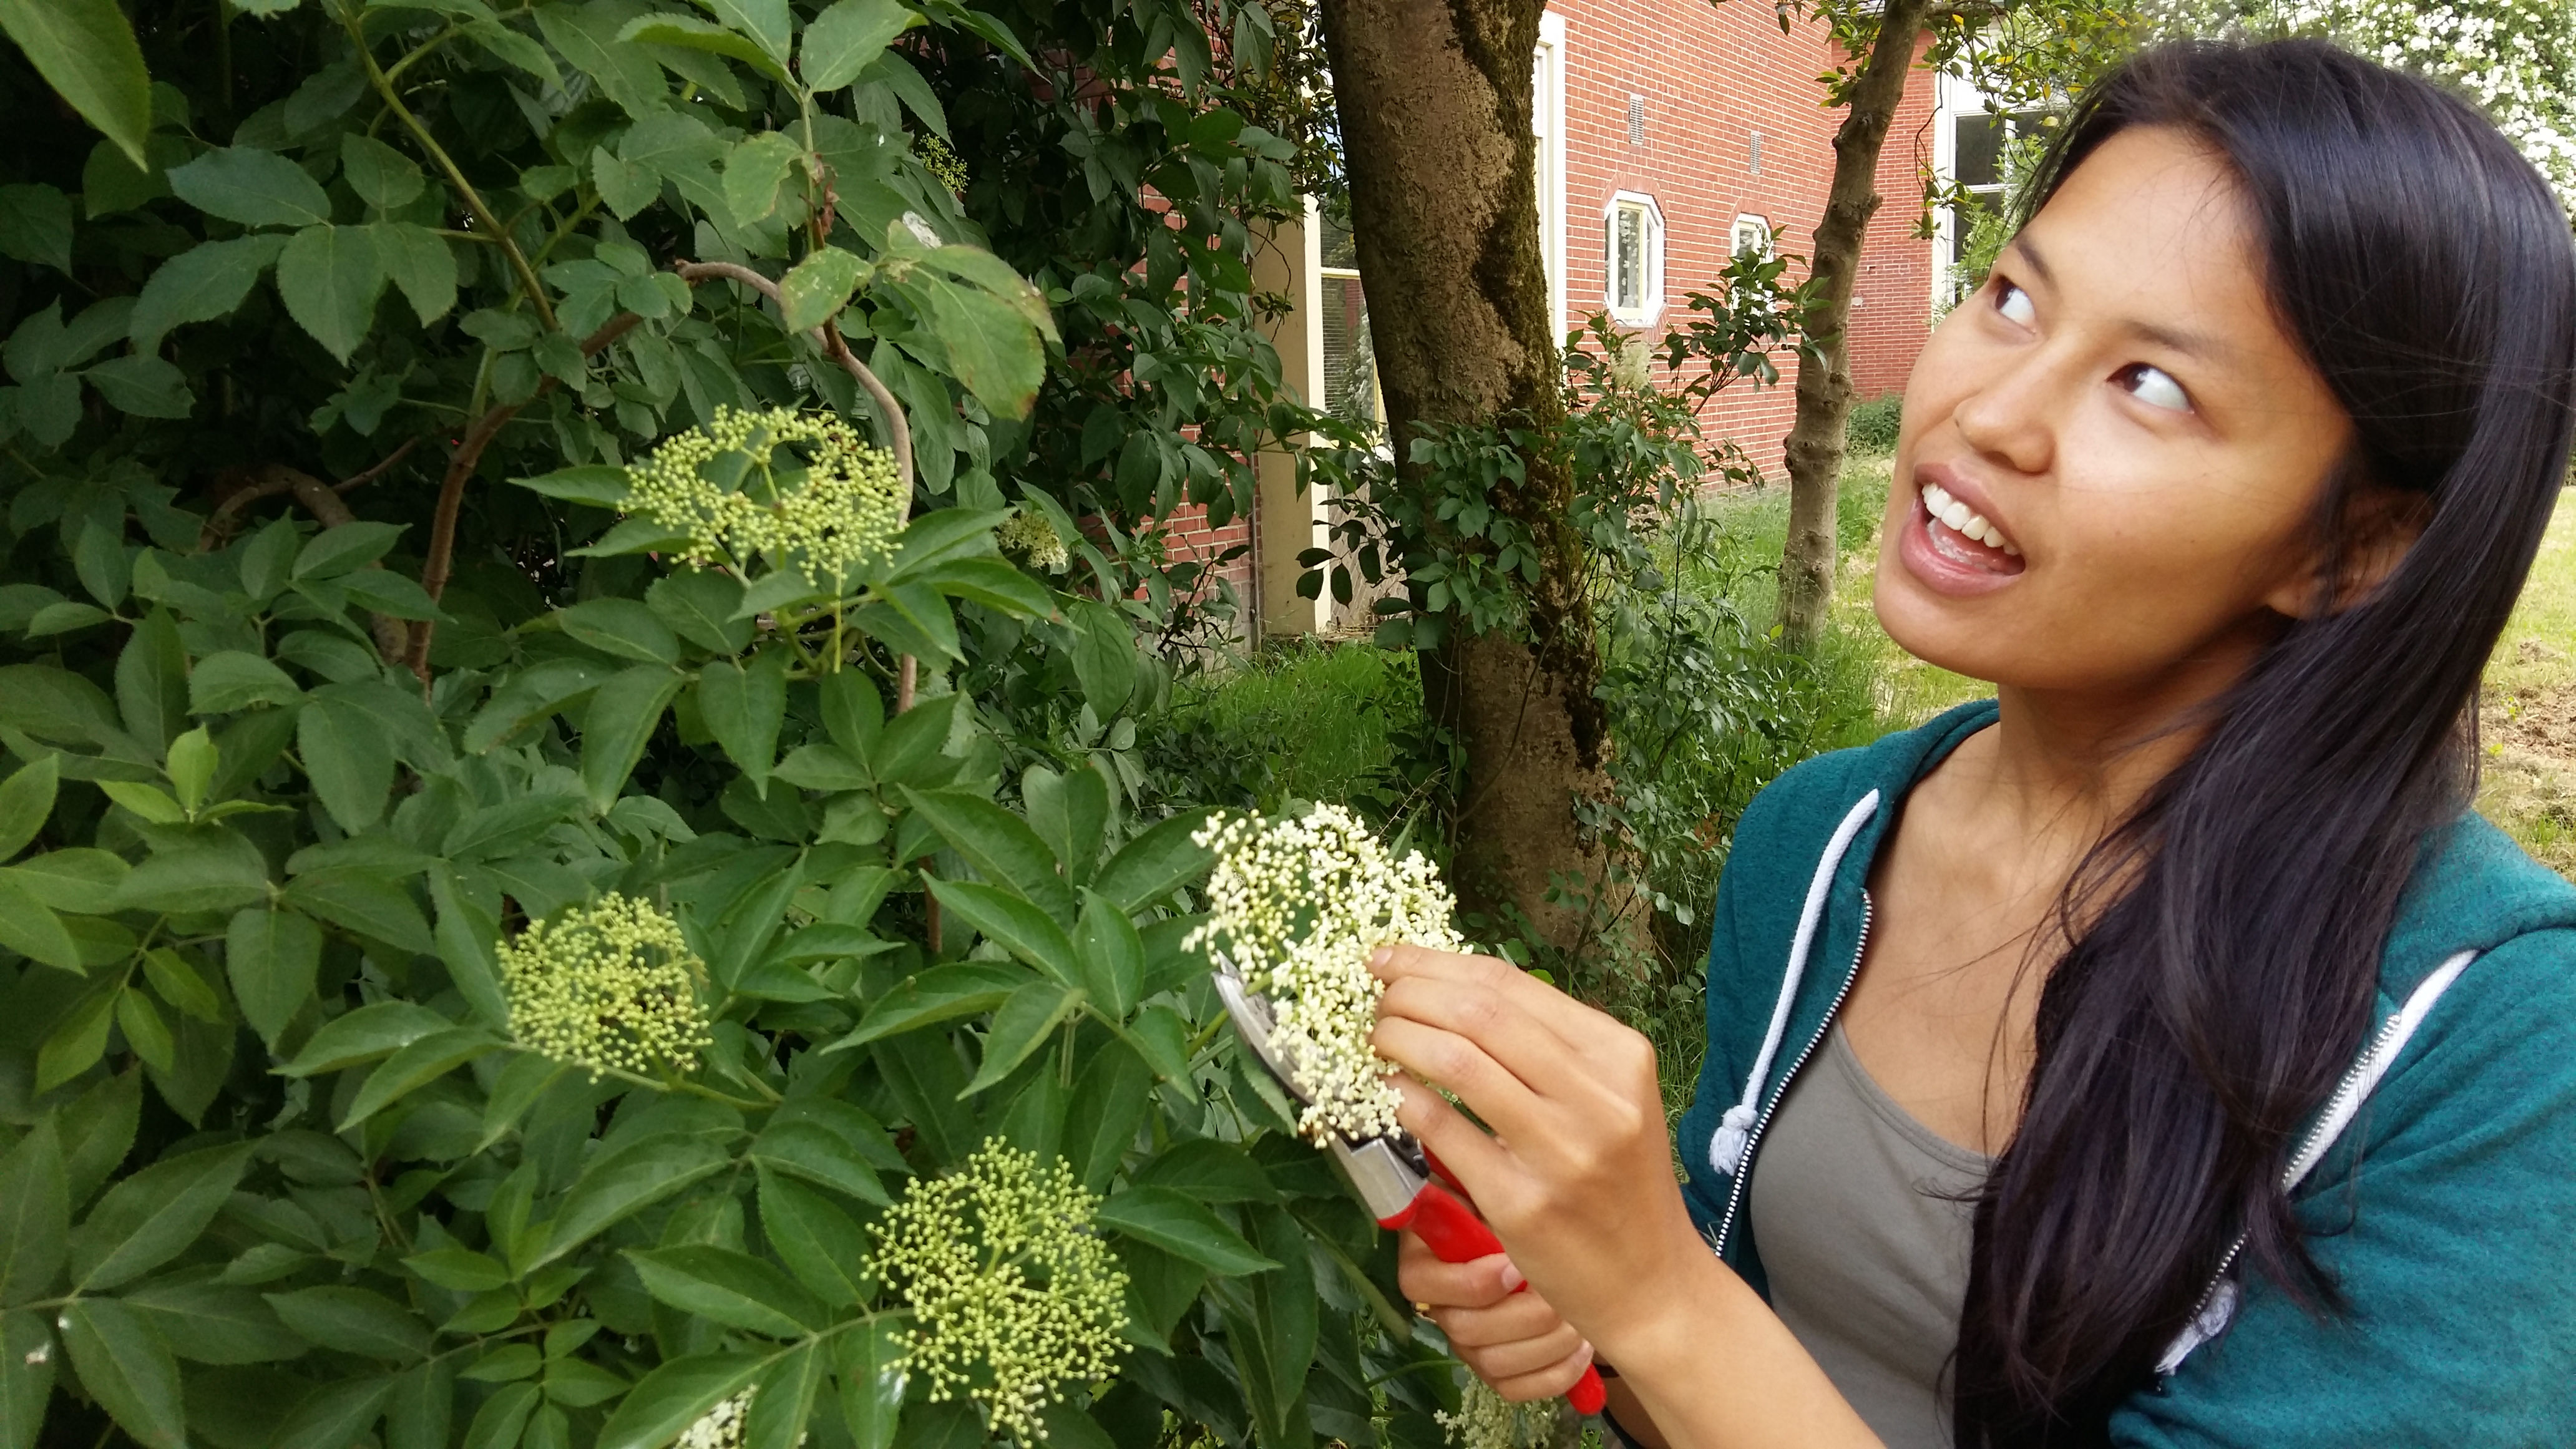 Marilisa is ogling those delicious, sweet-scented elderflowers, wondering which one to sever from its branch next.